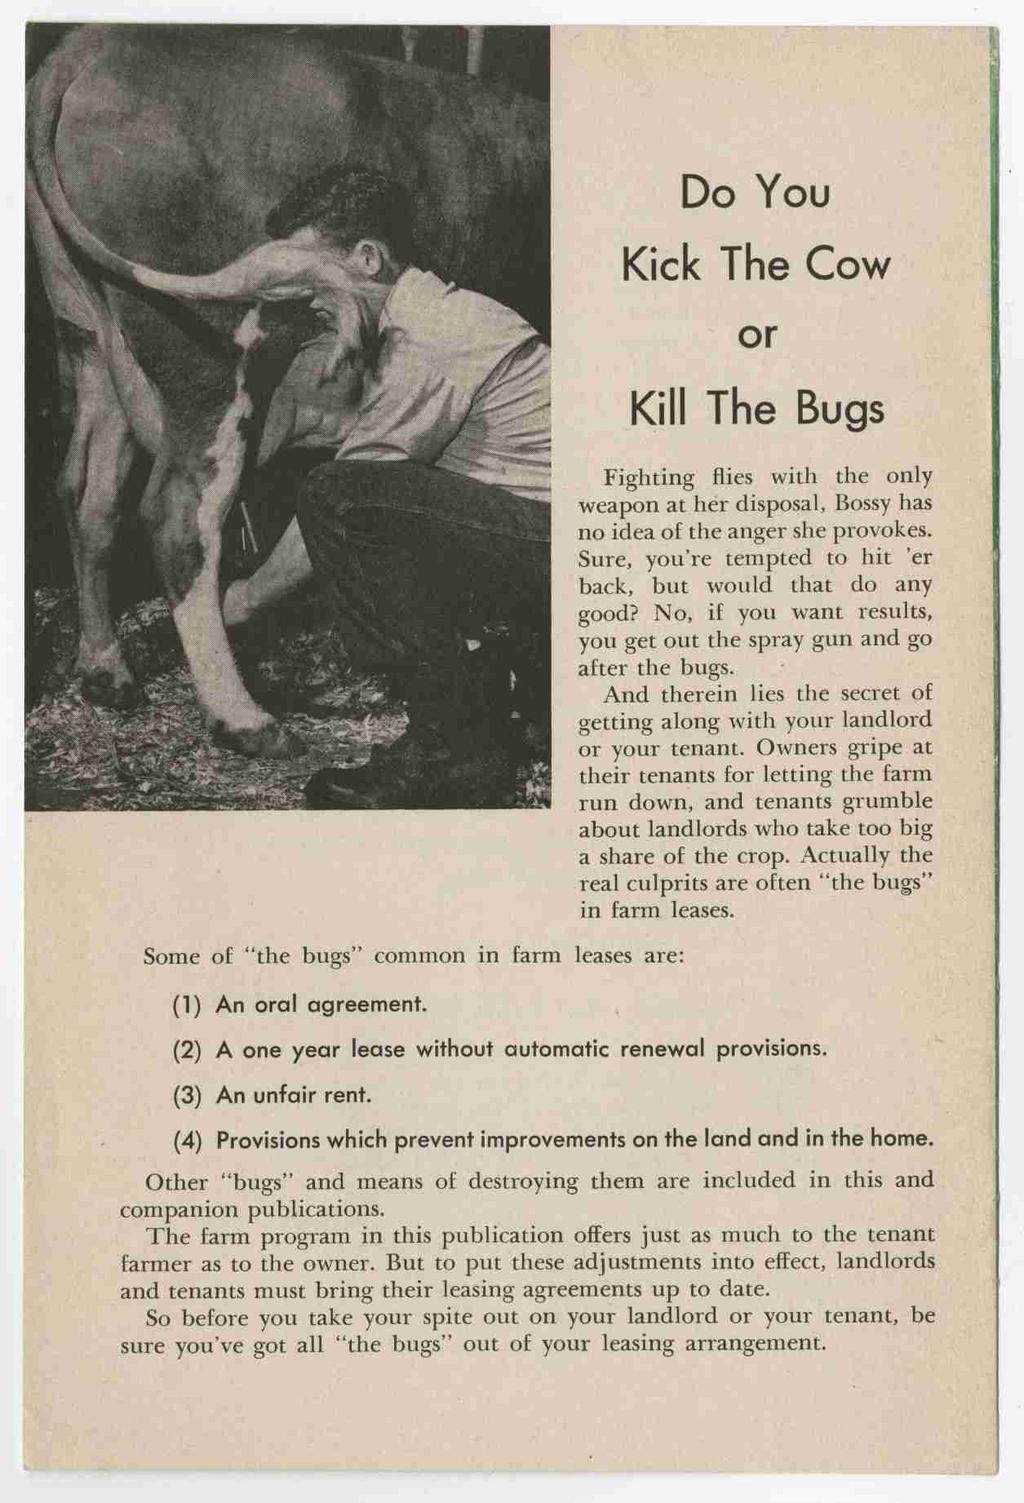 Do You Kick The Cow or Some of the bugs common in farm leases are: (1) An oral agreement.